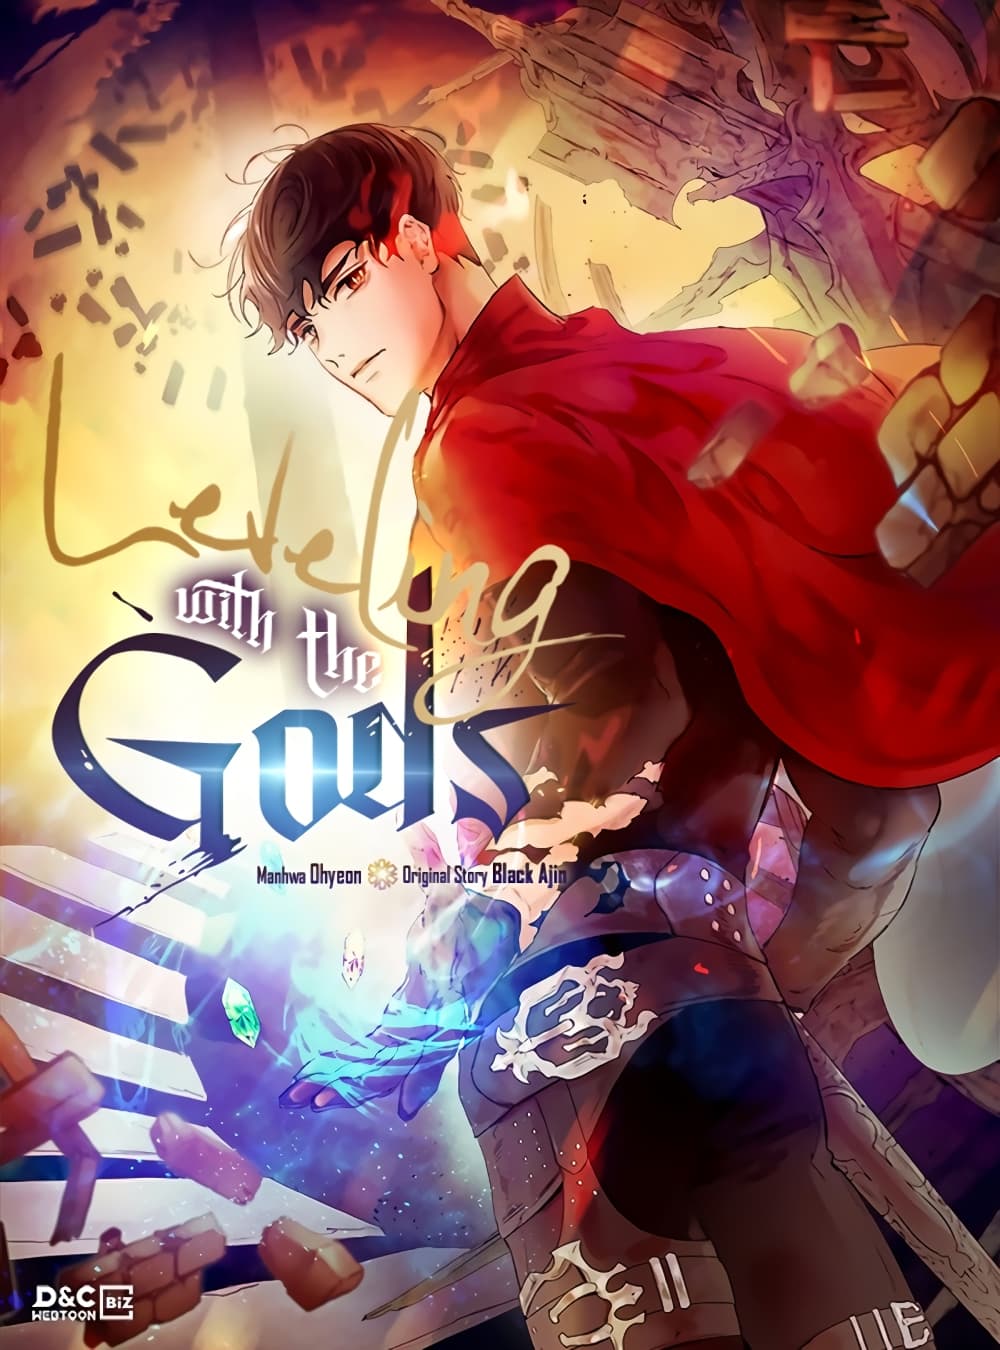 Leveling With The Gods15 (1)